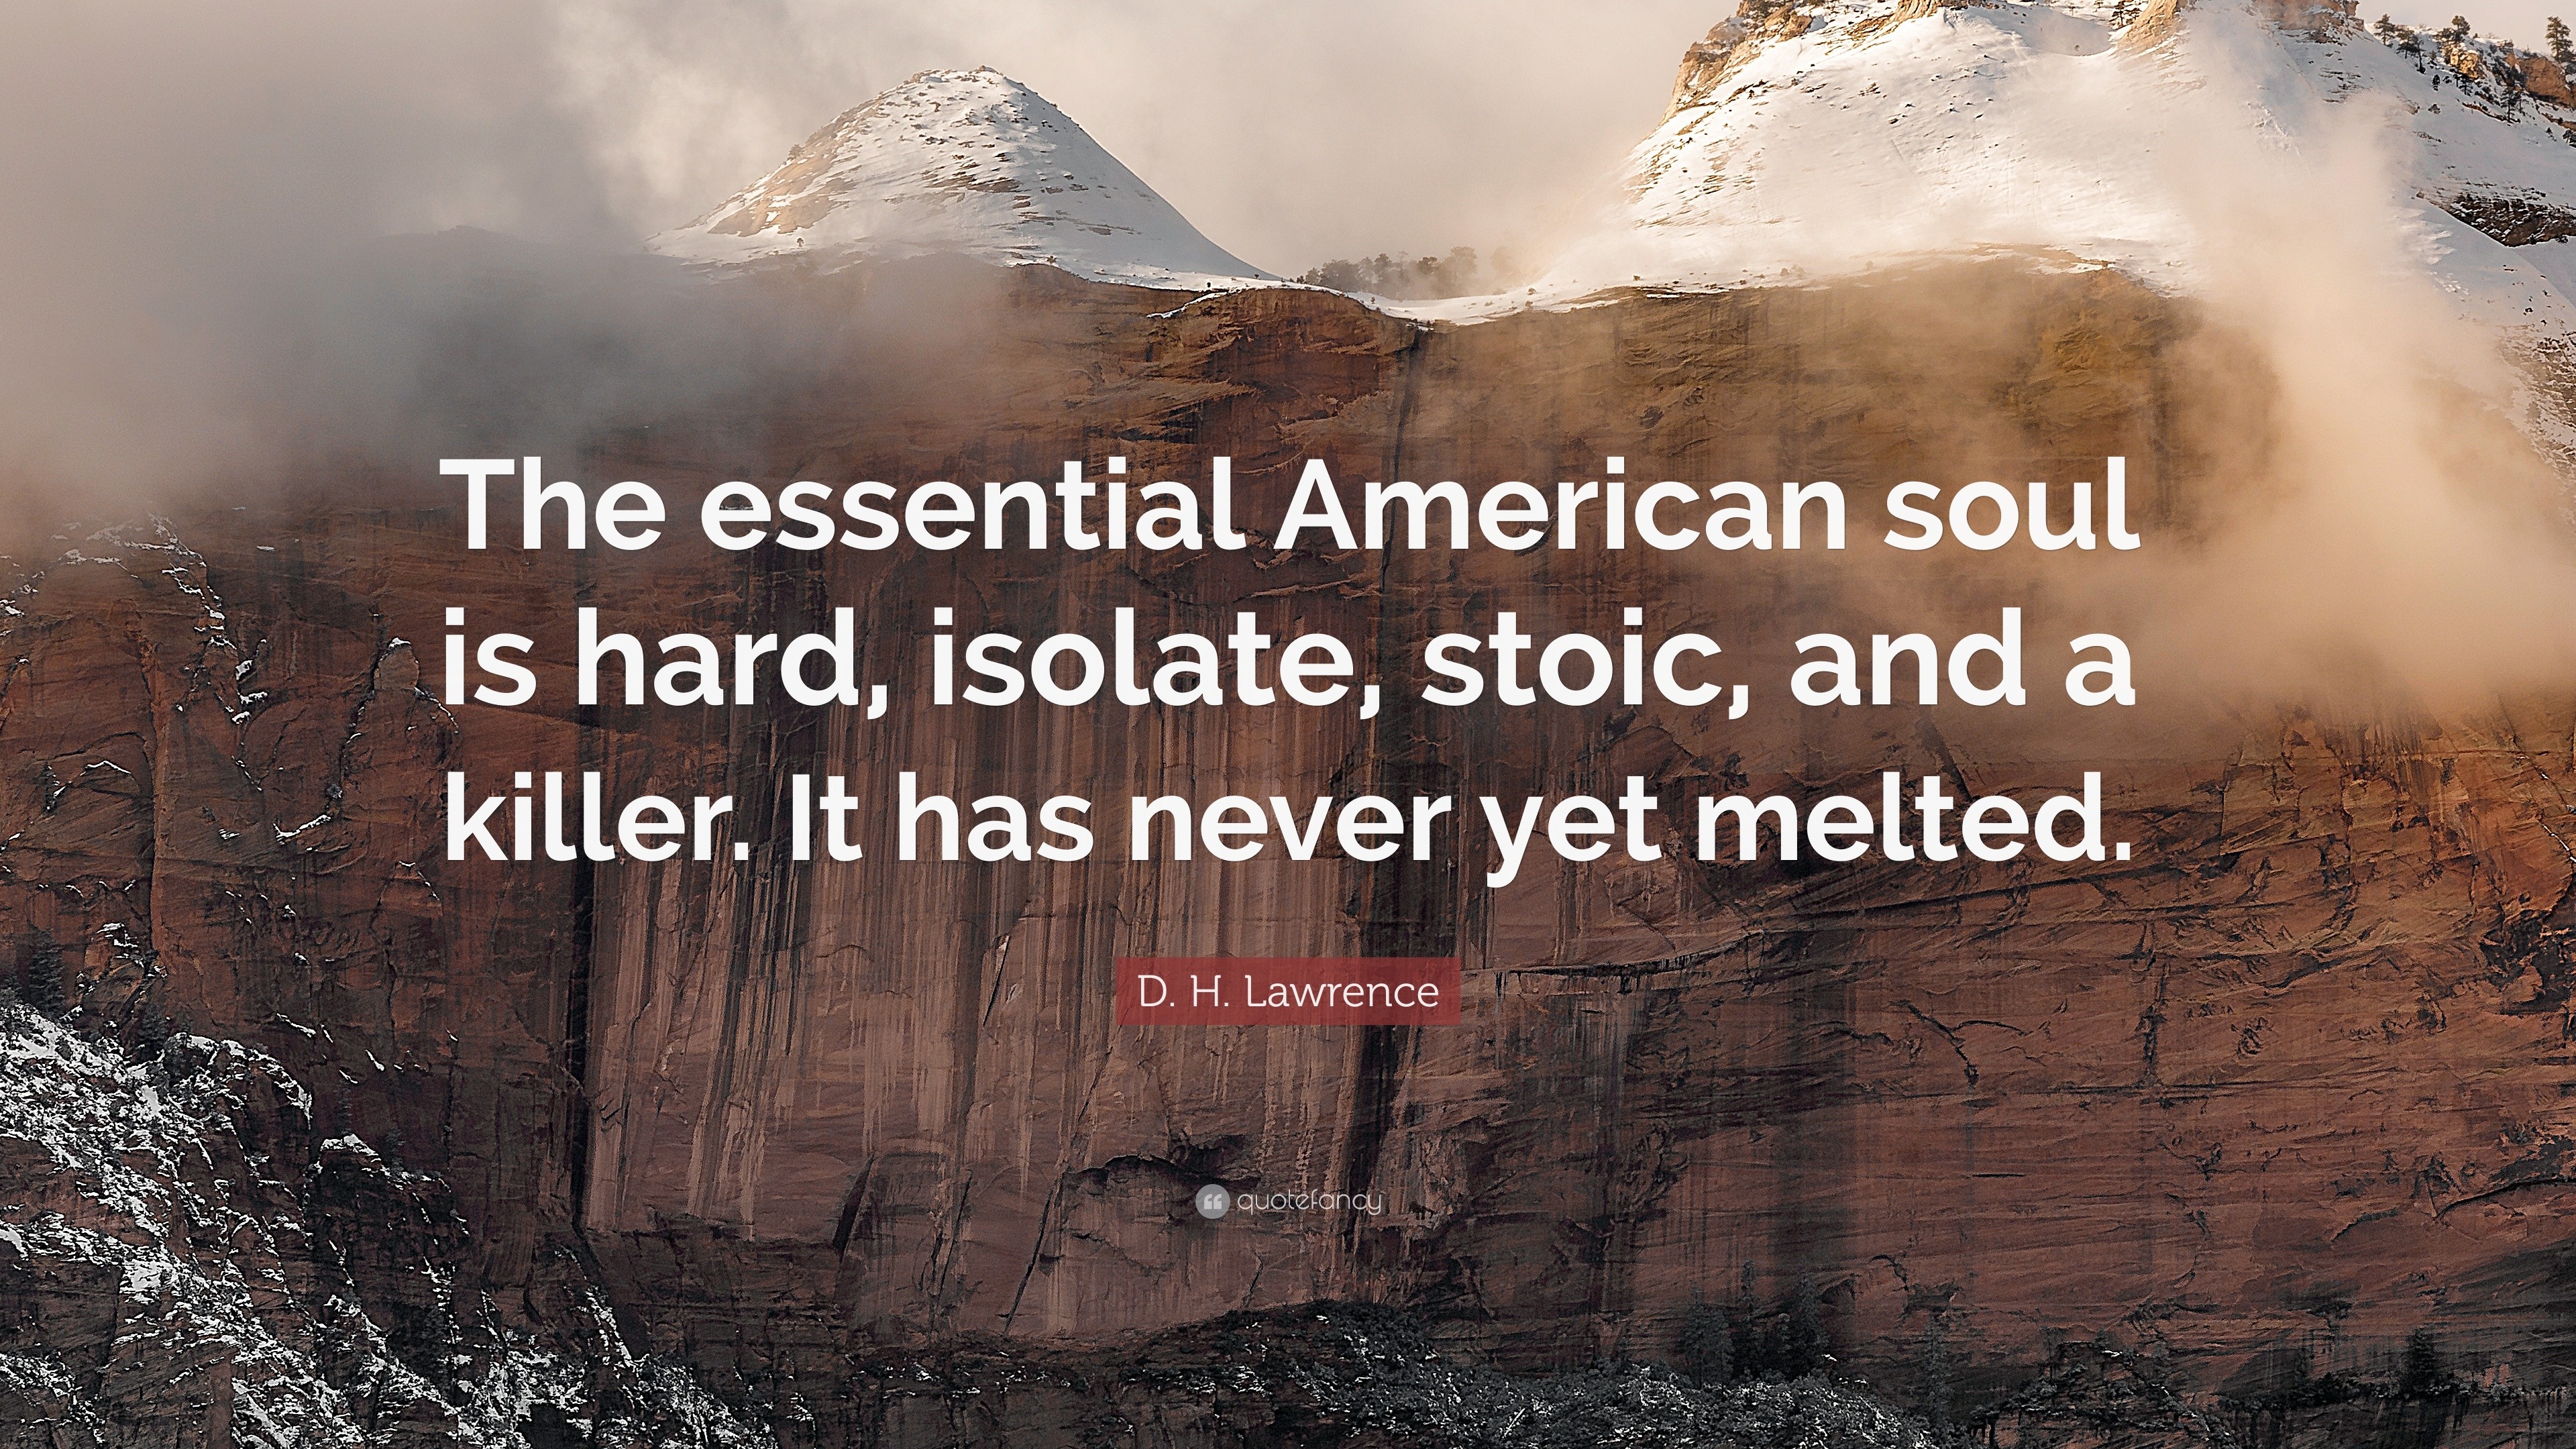 1930262-D-H-Lawrence-Quote-The-essential-American-soul-is-hard-isolate.jpg